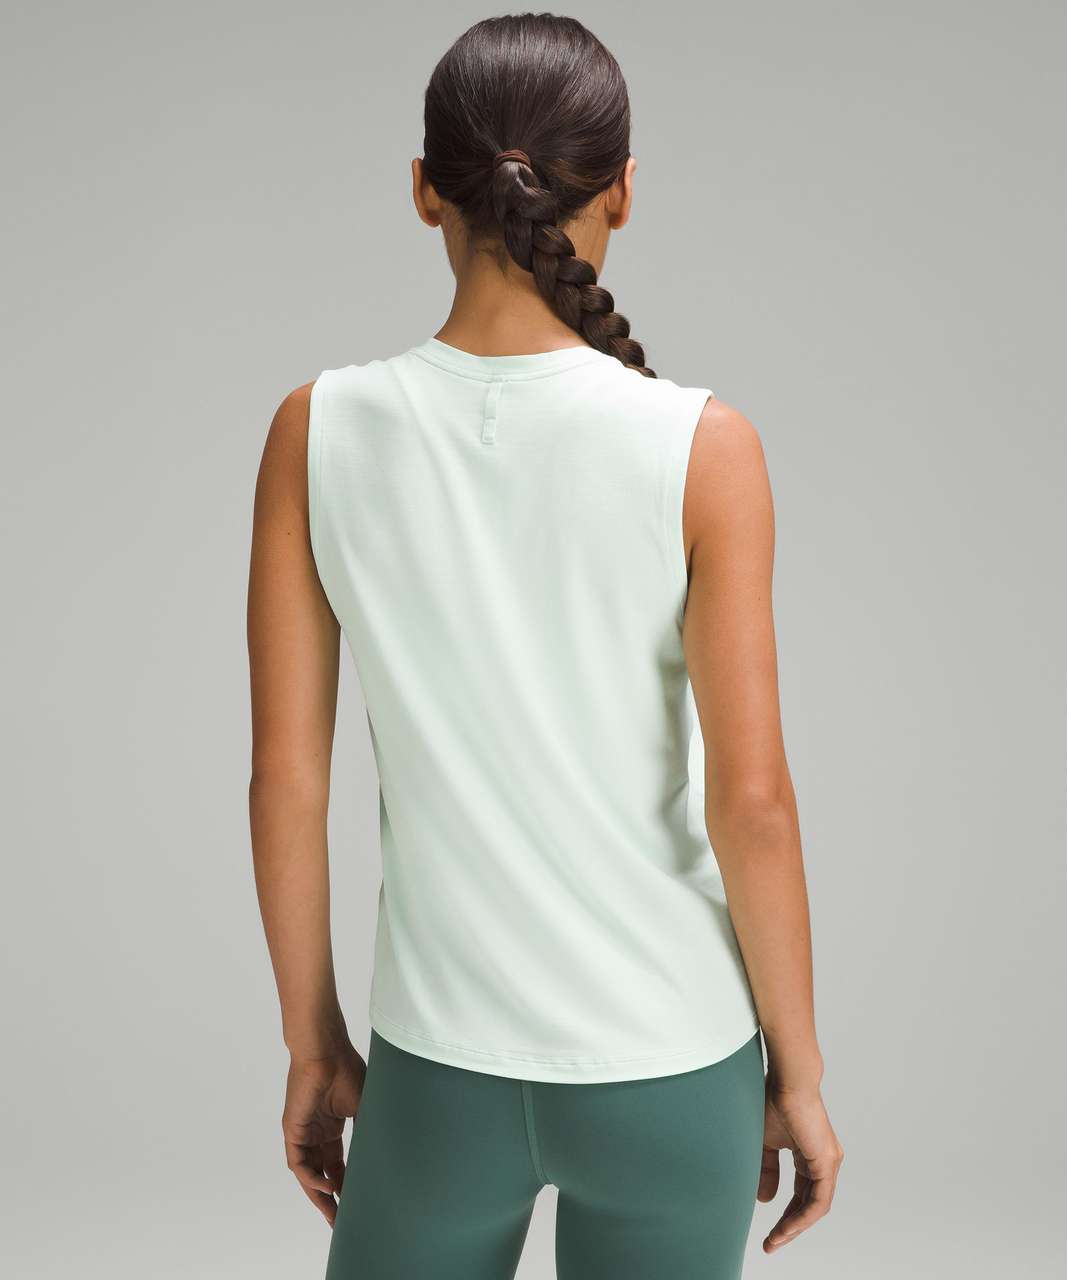 Lululemon License to Train Classic-Fit Tank Top - Heathered Mint Moment